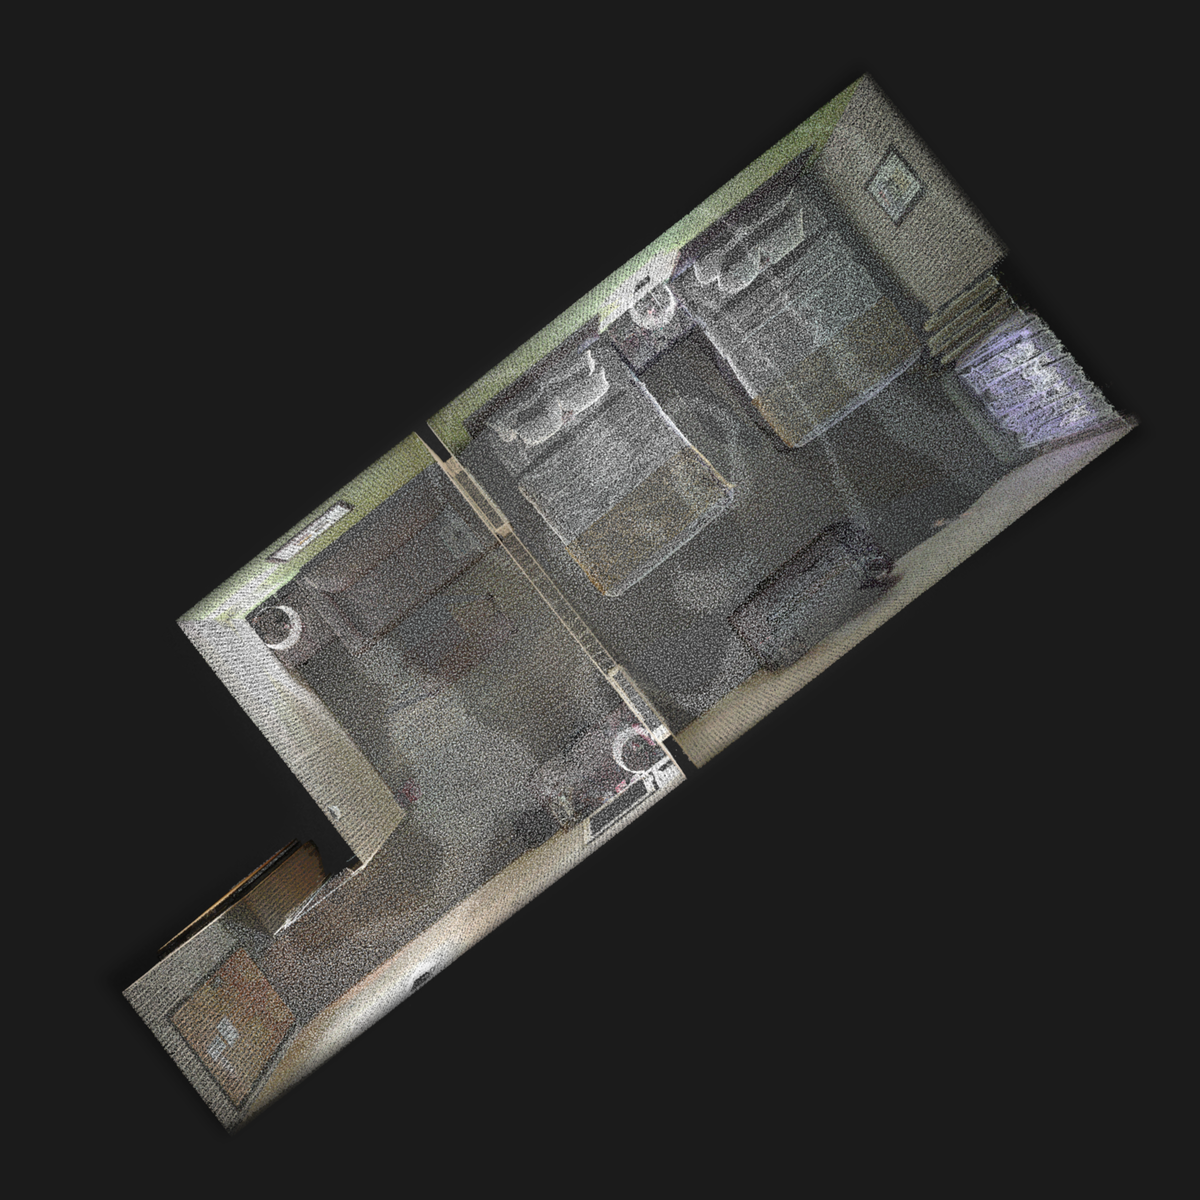 Point cloud of a hotel room as seen from above.